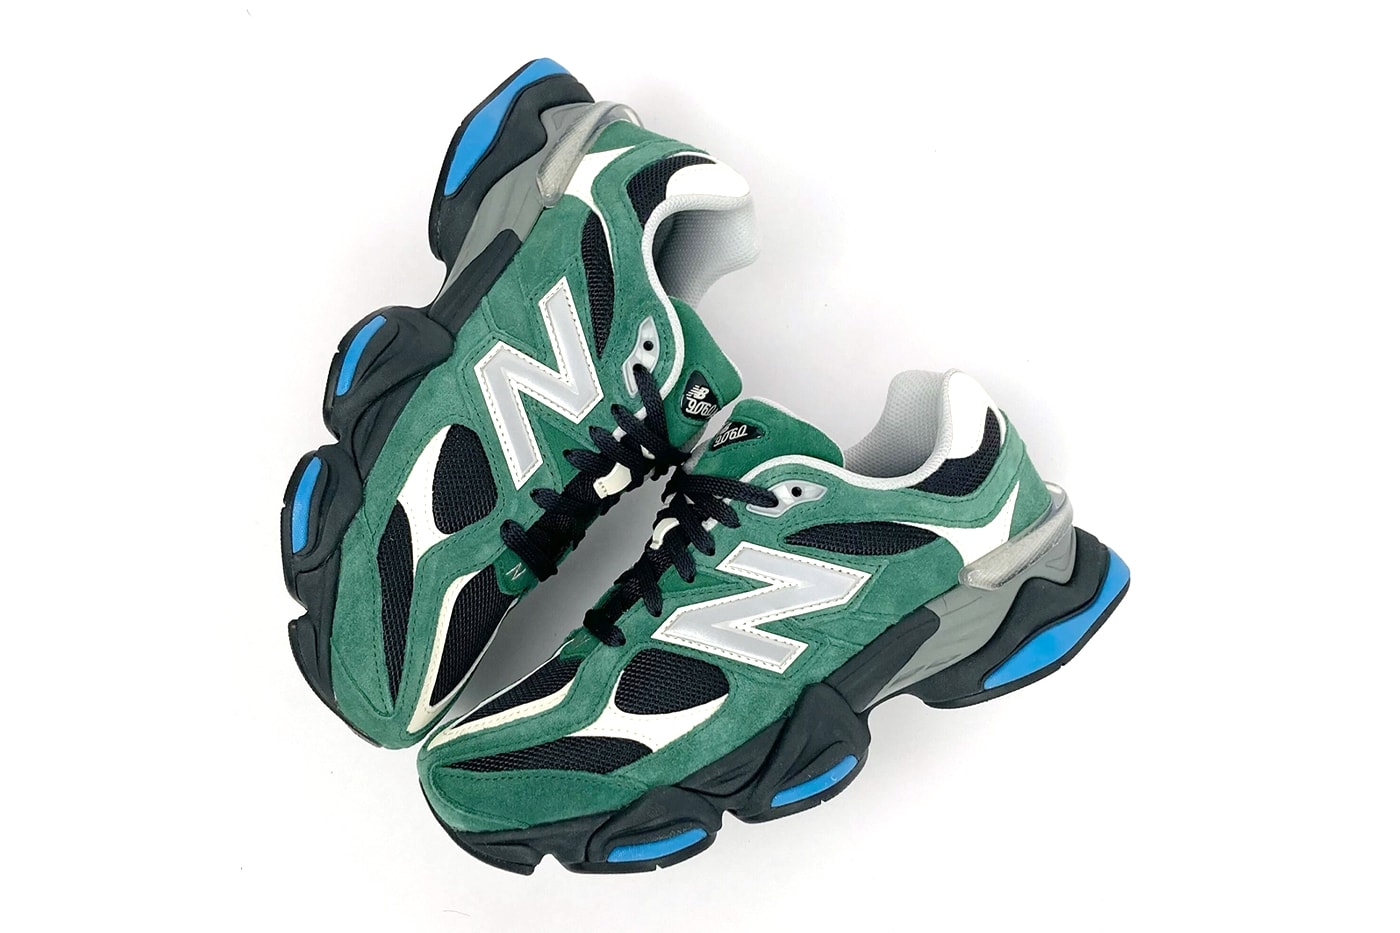 New Balance 90 60 pine green silver cream suede abzorb sbs release info date price